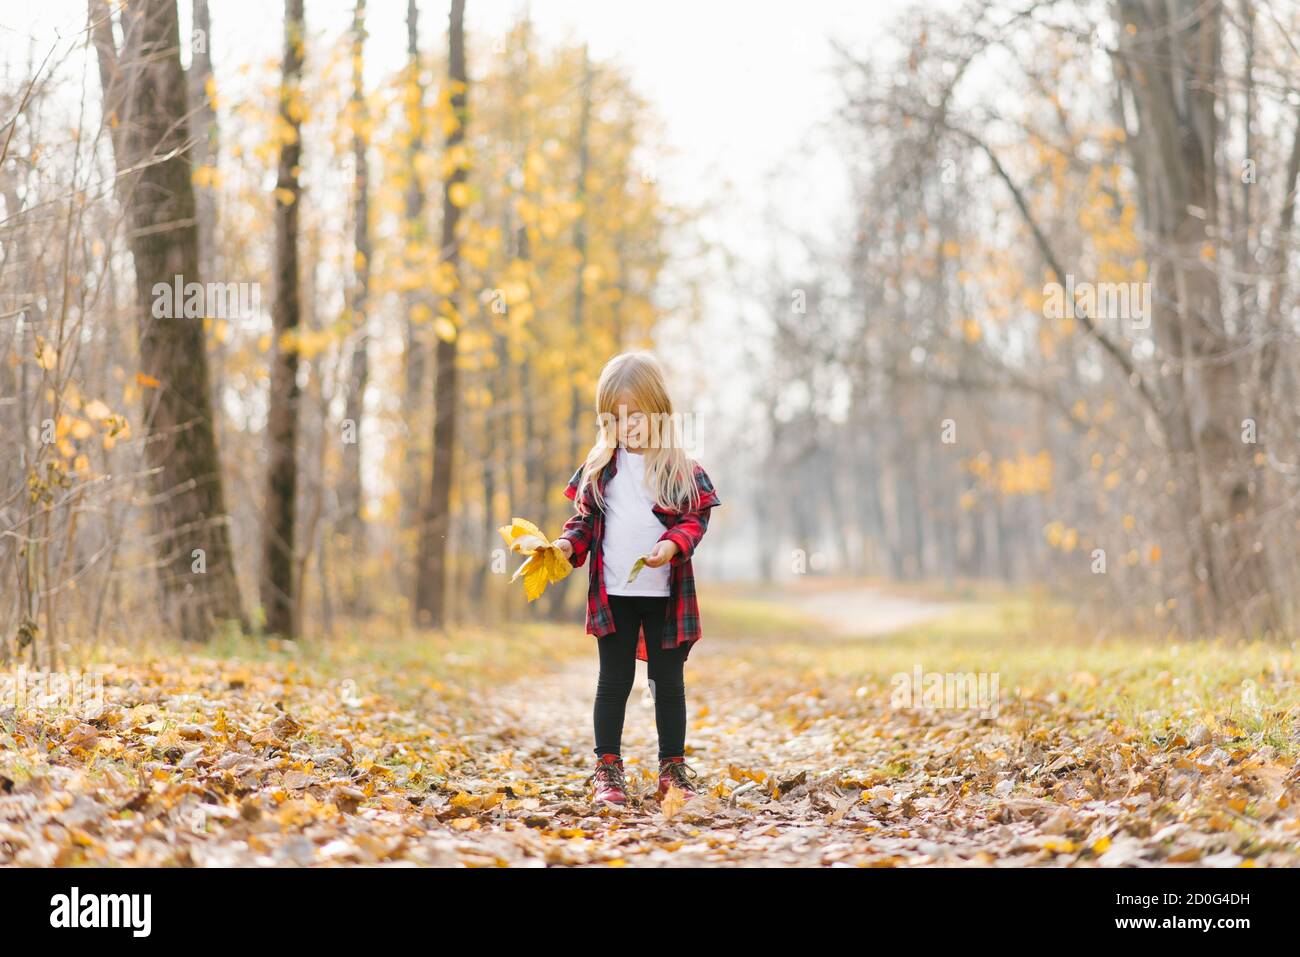 A little girl collects autumn fallen leaves in a bouquet in the Park. Happy childhood Stock Photo